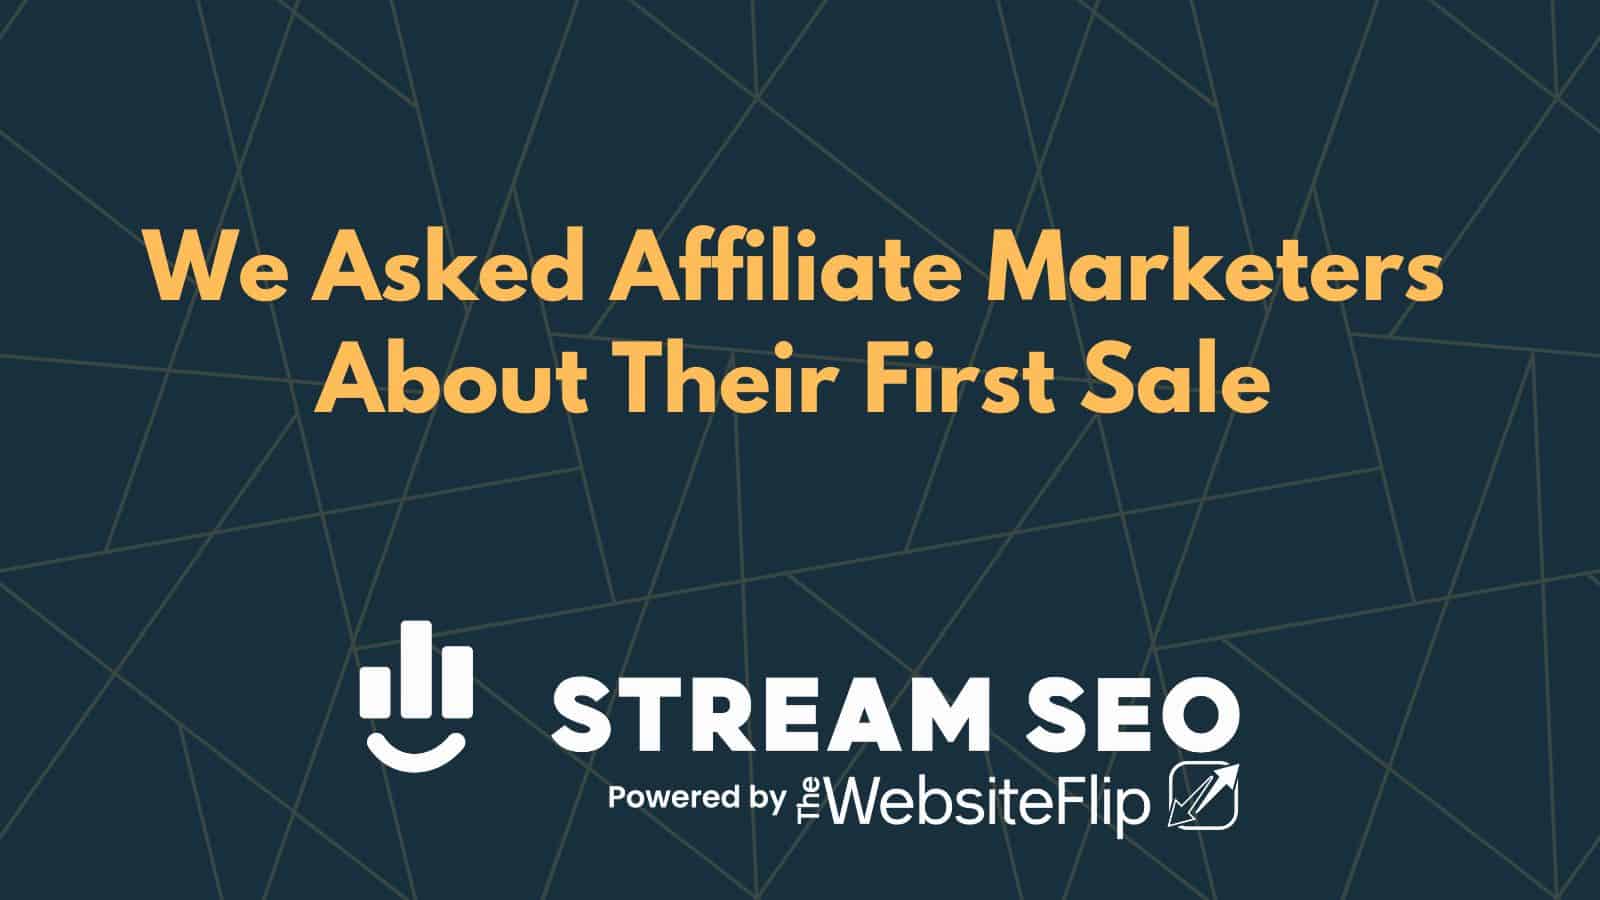 We Asked 10 Affiliate Marketers About Their First Sale